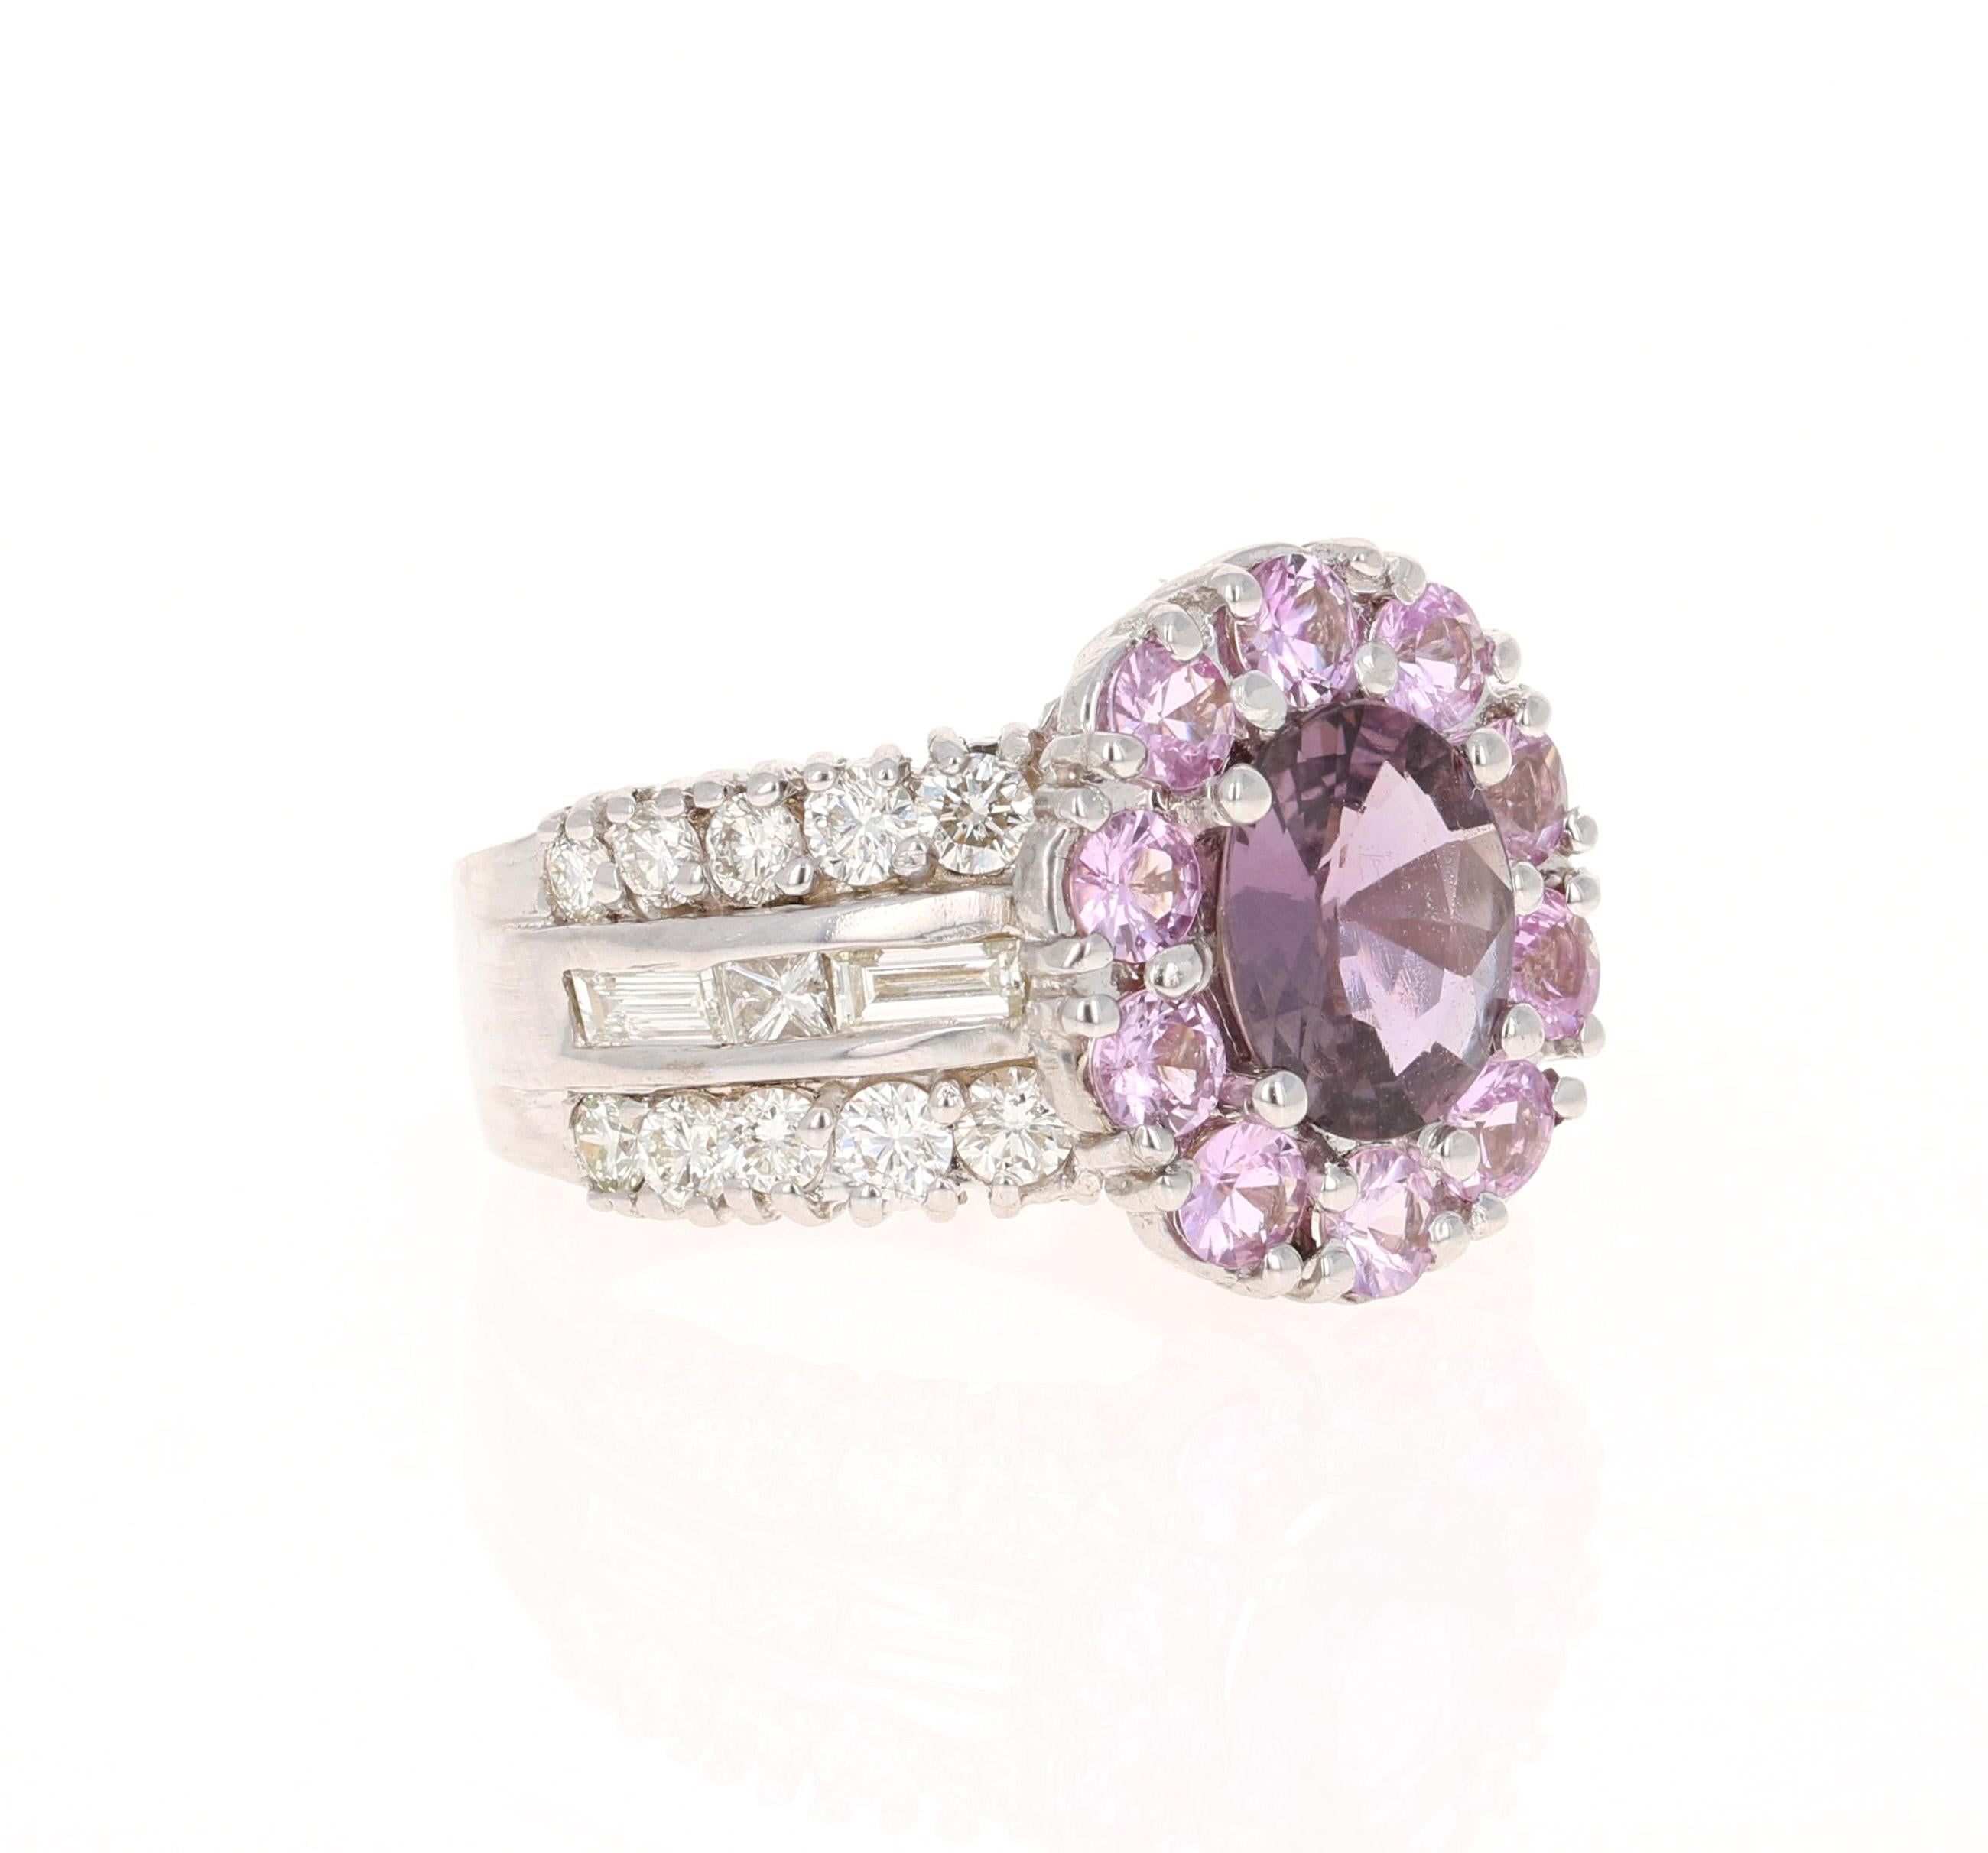 This ring has a Oval Cut GIA Certified Pinkish Purple Sapphire that weighs 1.56 carats. The measurements of the Sapphire are approximately 8.6 mm x 7 mm. It also has 10 Round Cut Pink Sapphires that weigh 1.15 carats. There are Baguette Cut Diamonds